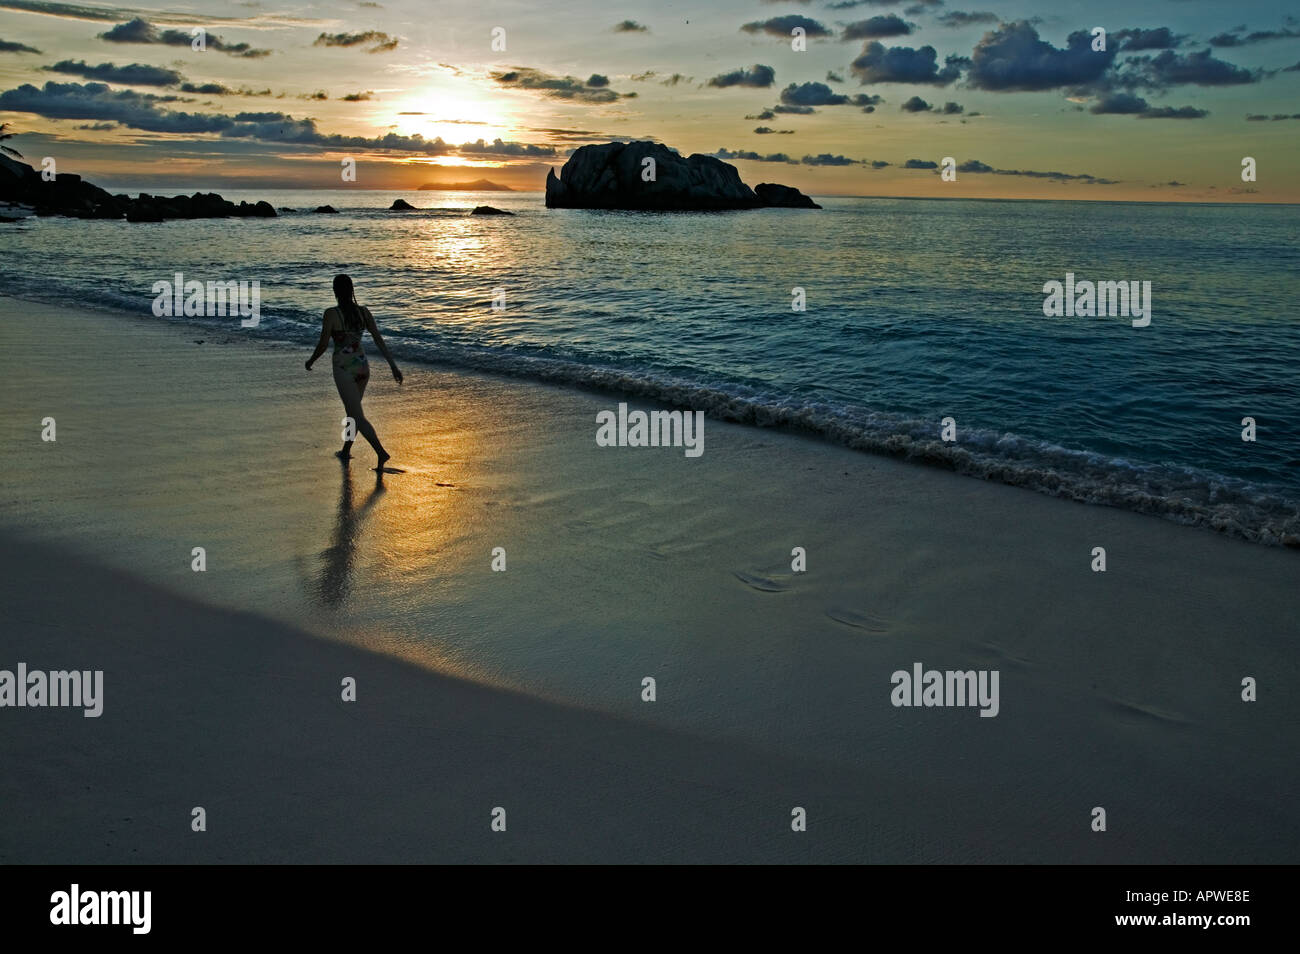 People on beach at sunset Model released Seychelles Cousine Island Stock Photo